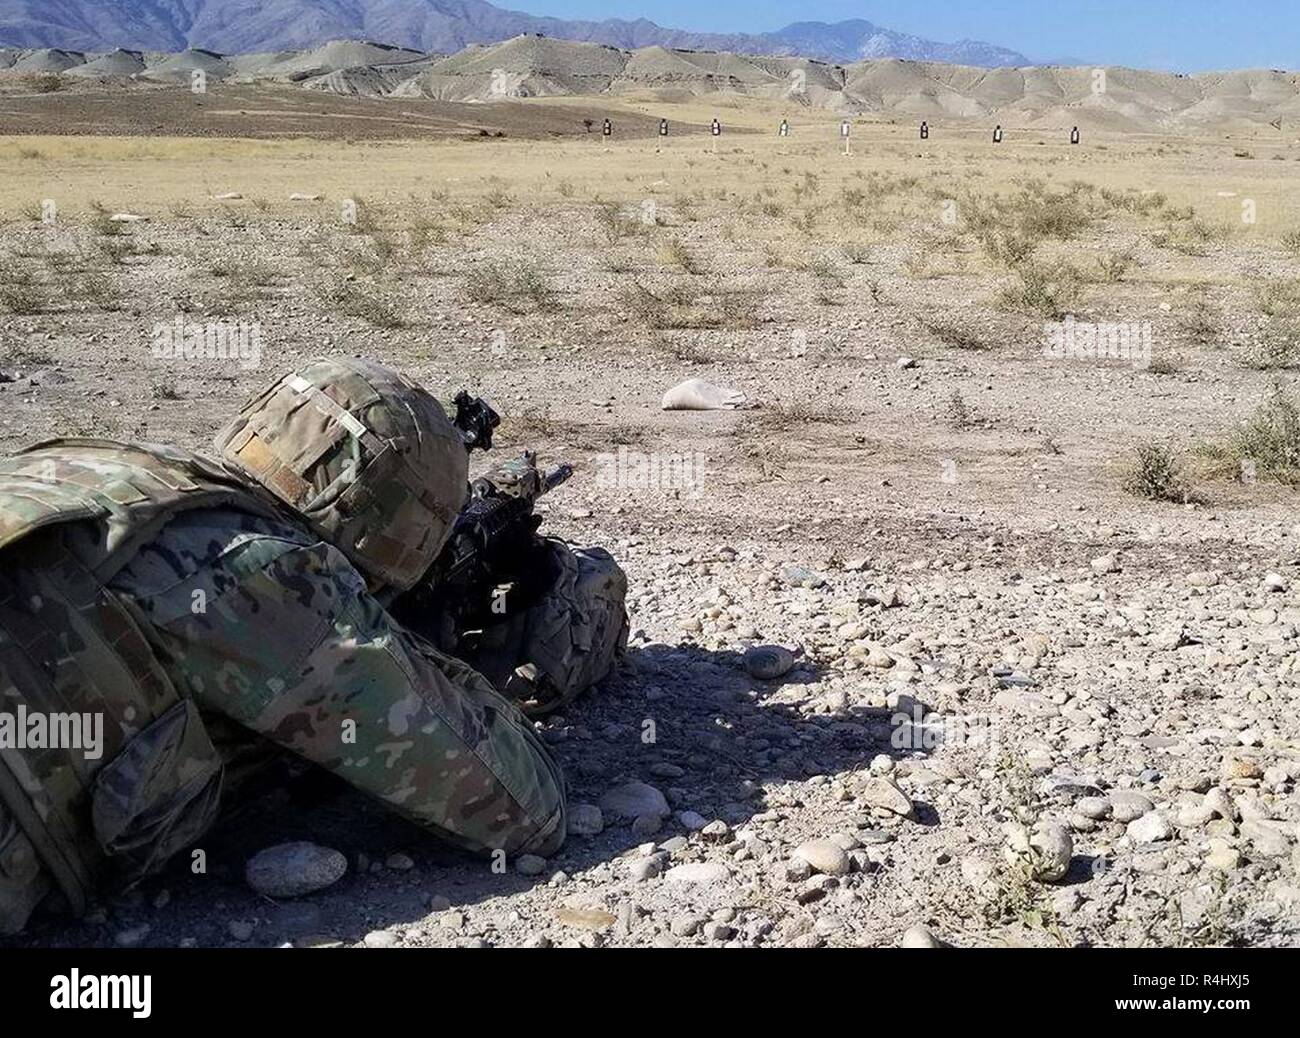 Raider Brigade Soldier from 1st Battalion, 38th Infantry Regiment, 1st Stryker Brigade Combat Team, 4th Infantry Division engage targets at a long range training exercise with his M4 rifle to remain Ready to execute during operations in Afghanistan, September 25, 2018. Stock Photo